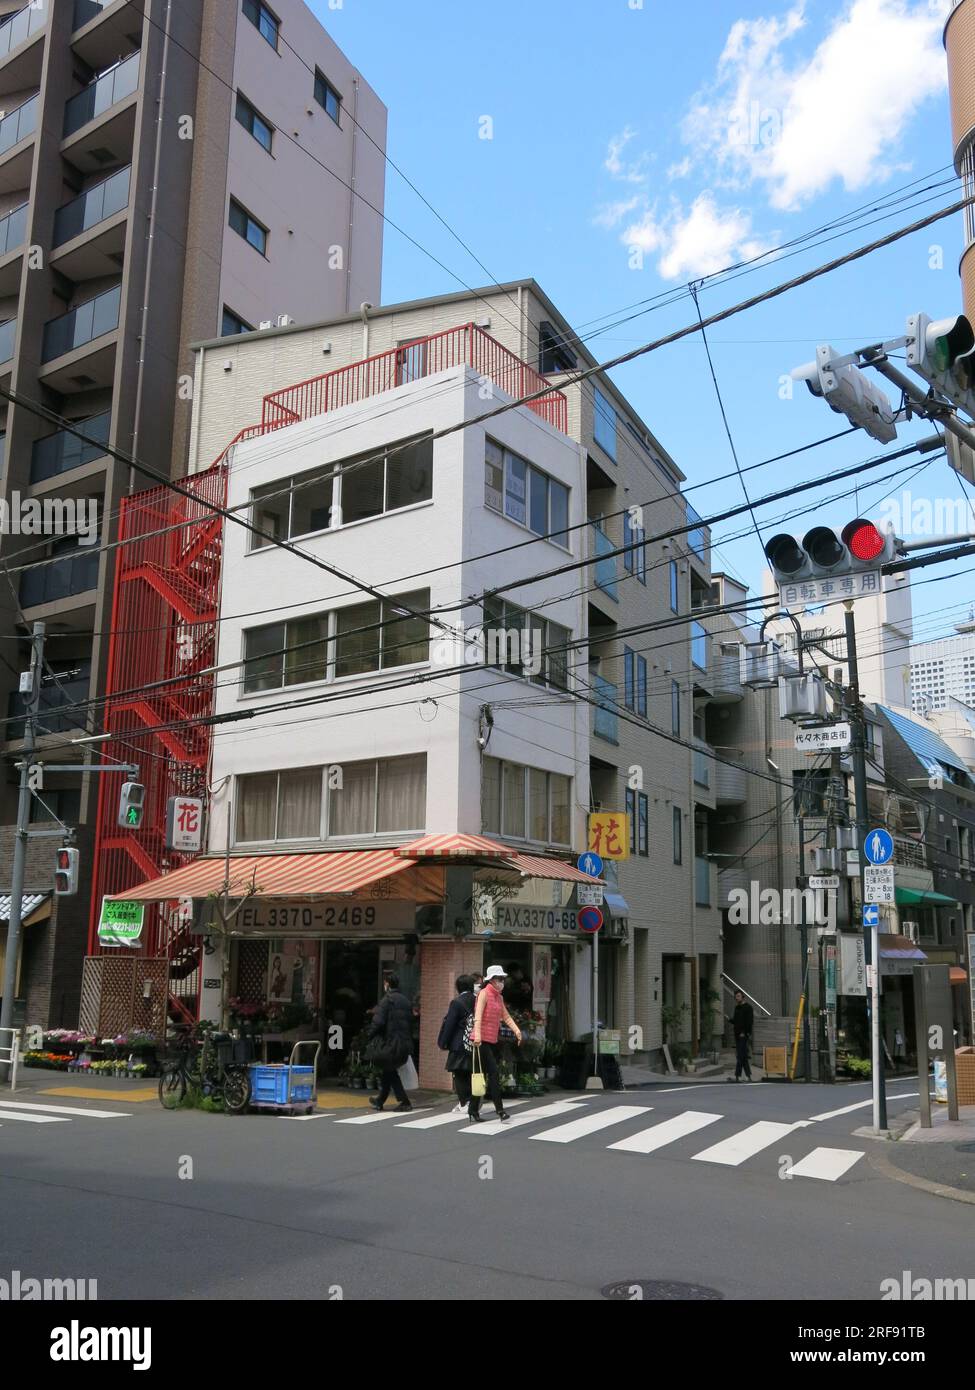 Street scene in Yoyogi, a suburb of wider Tokyo, showing a commercial district with tall buildings, pedestrian crossings & power lines across the road. Stock Photo